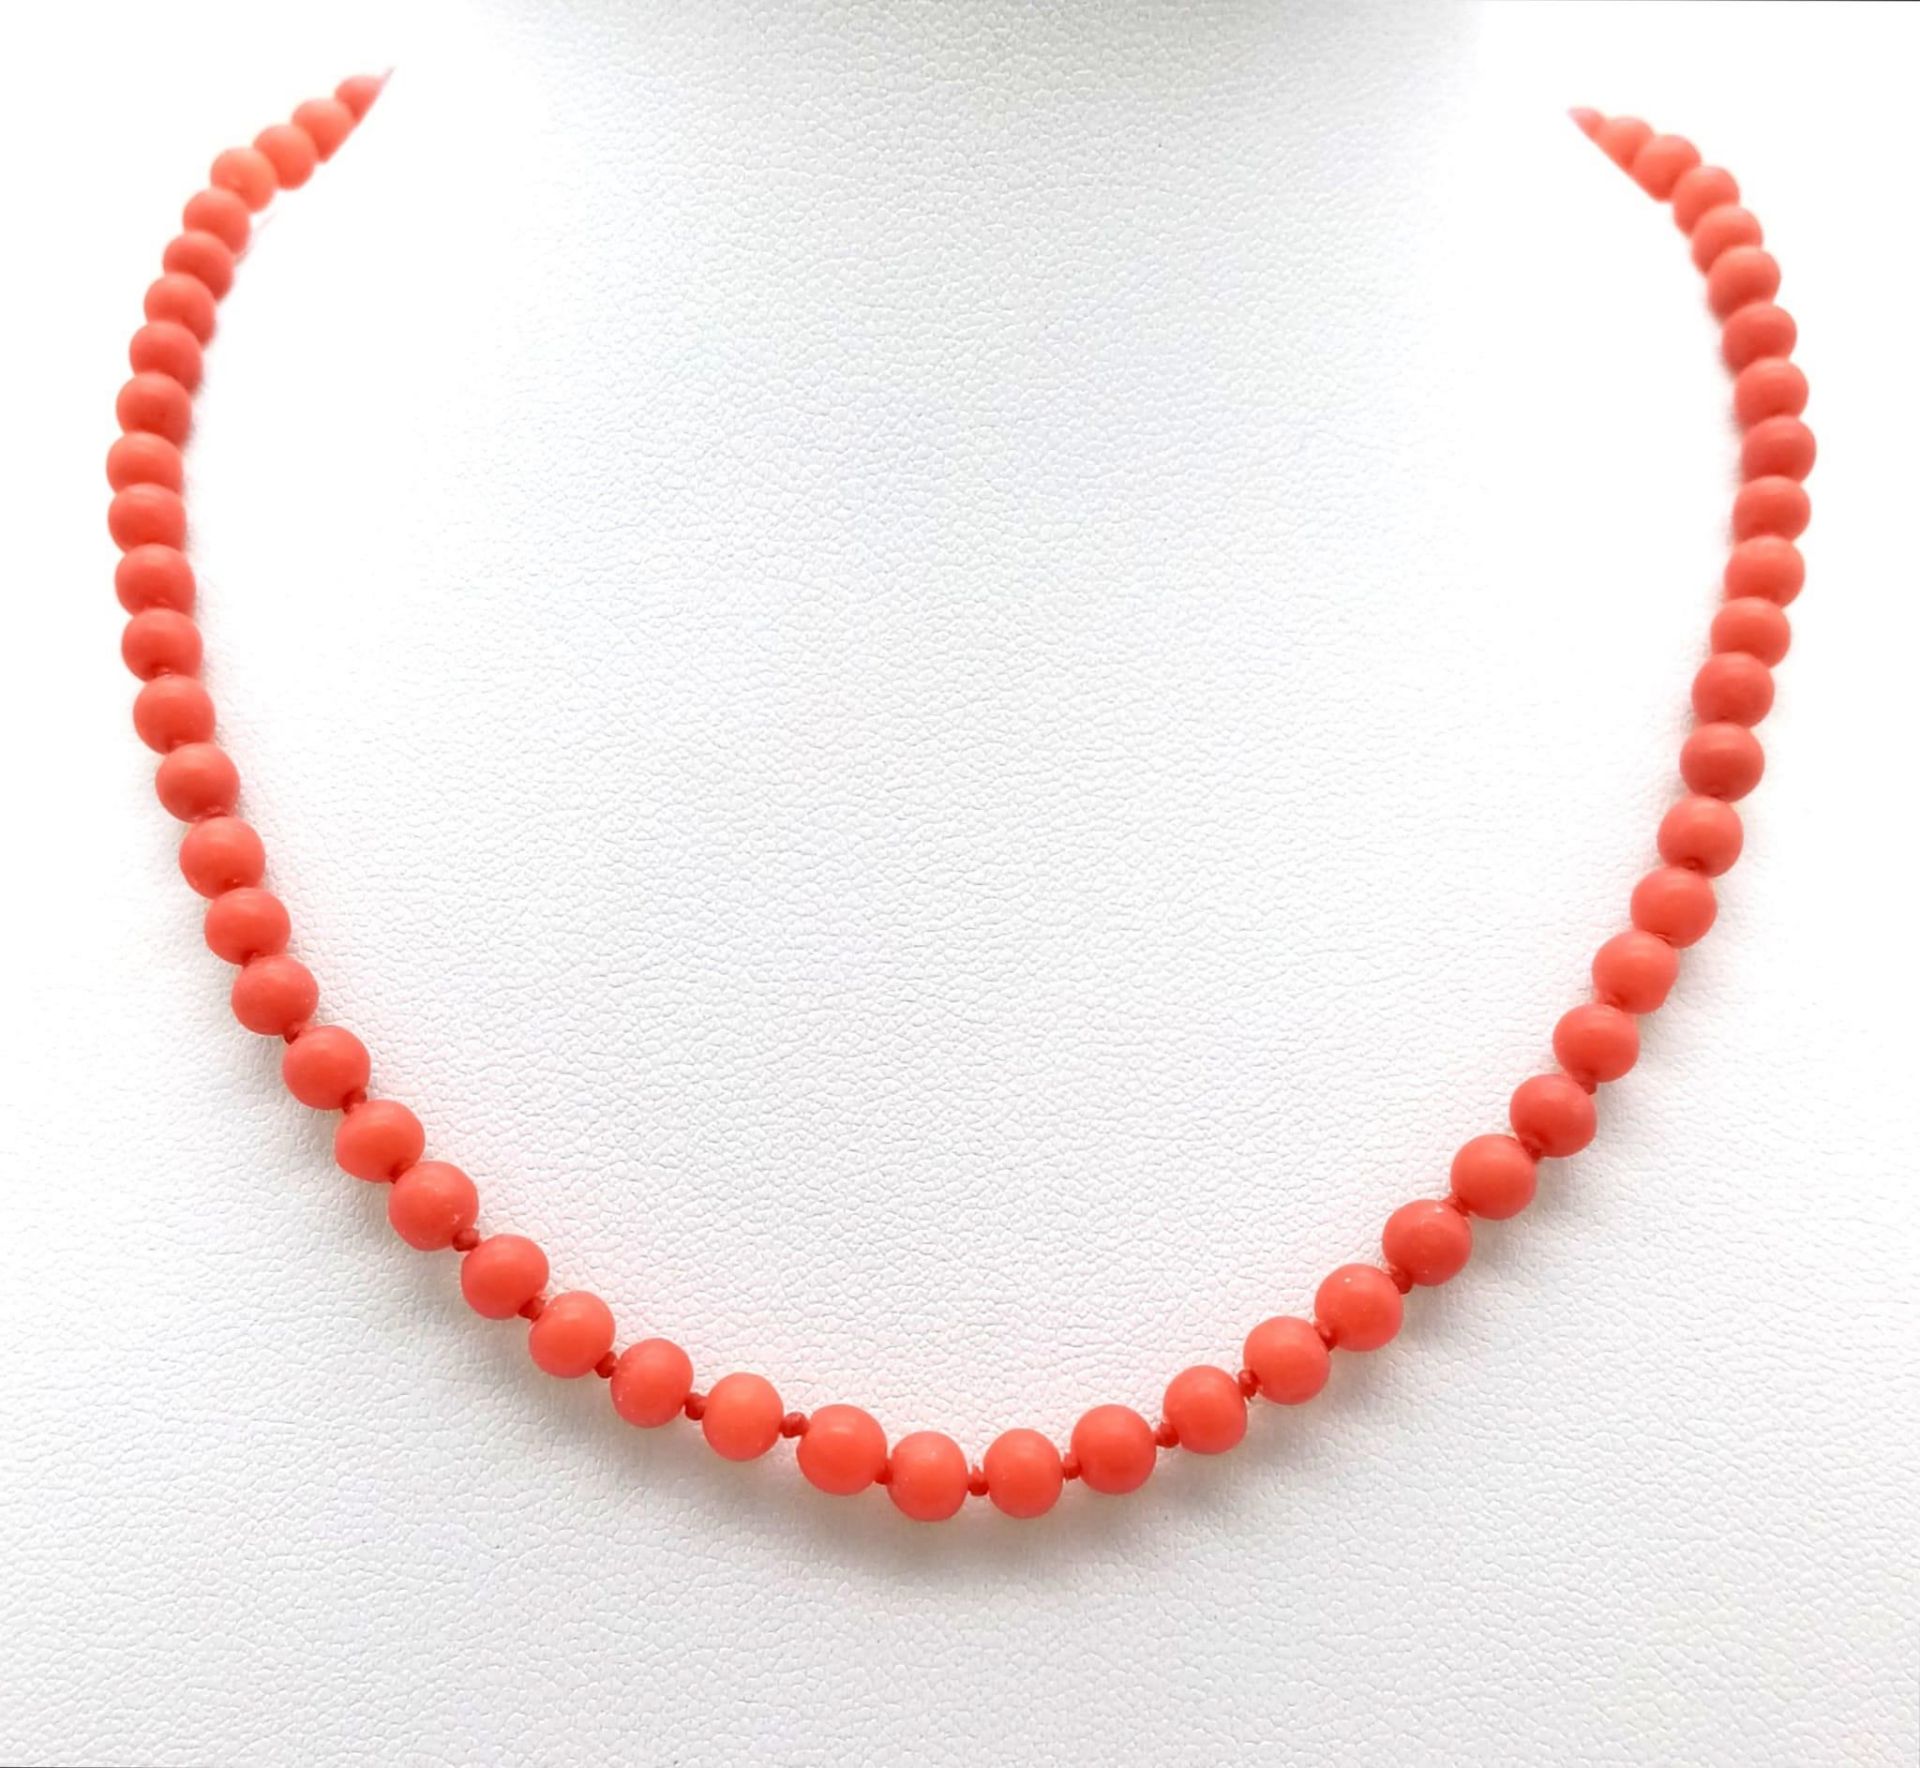 A vintage Orange Beaded Necklace. Measuring 38cms in length, this necklace is a great, bold addition